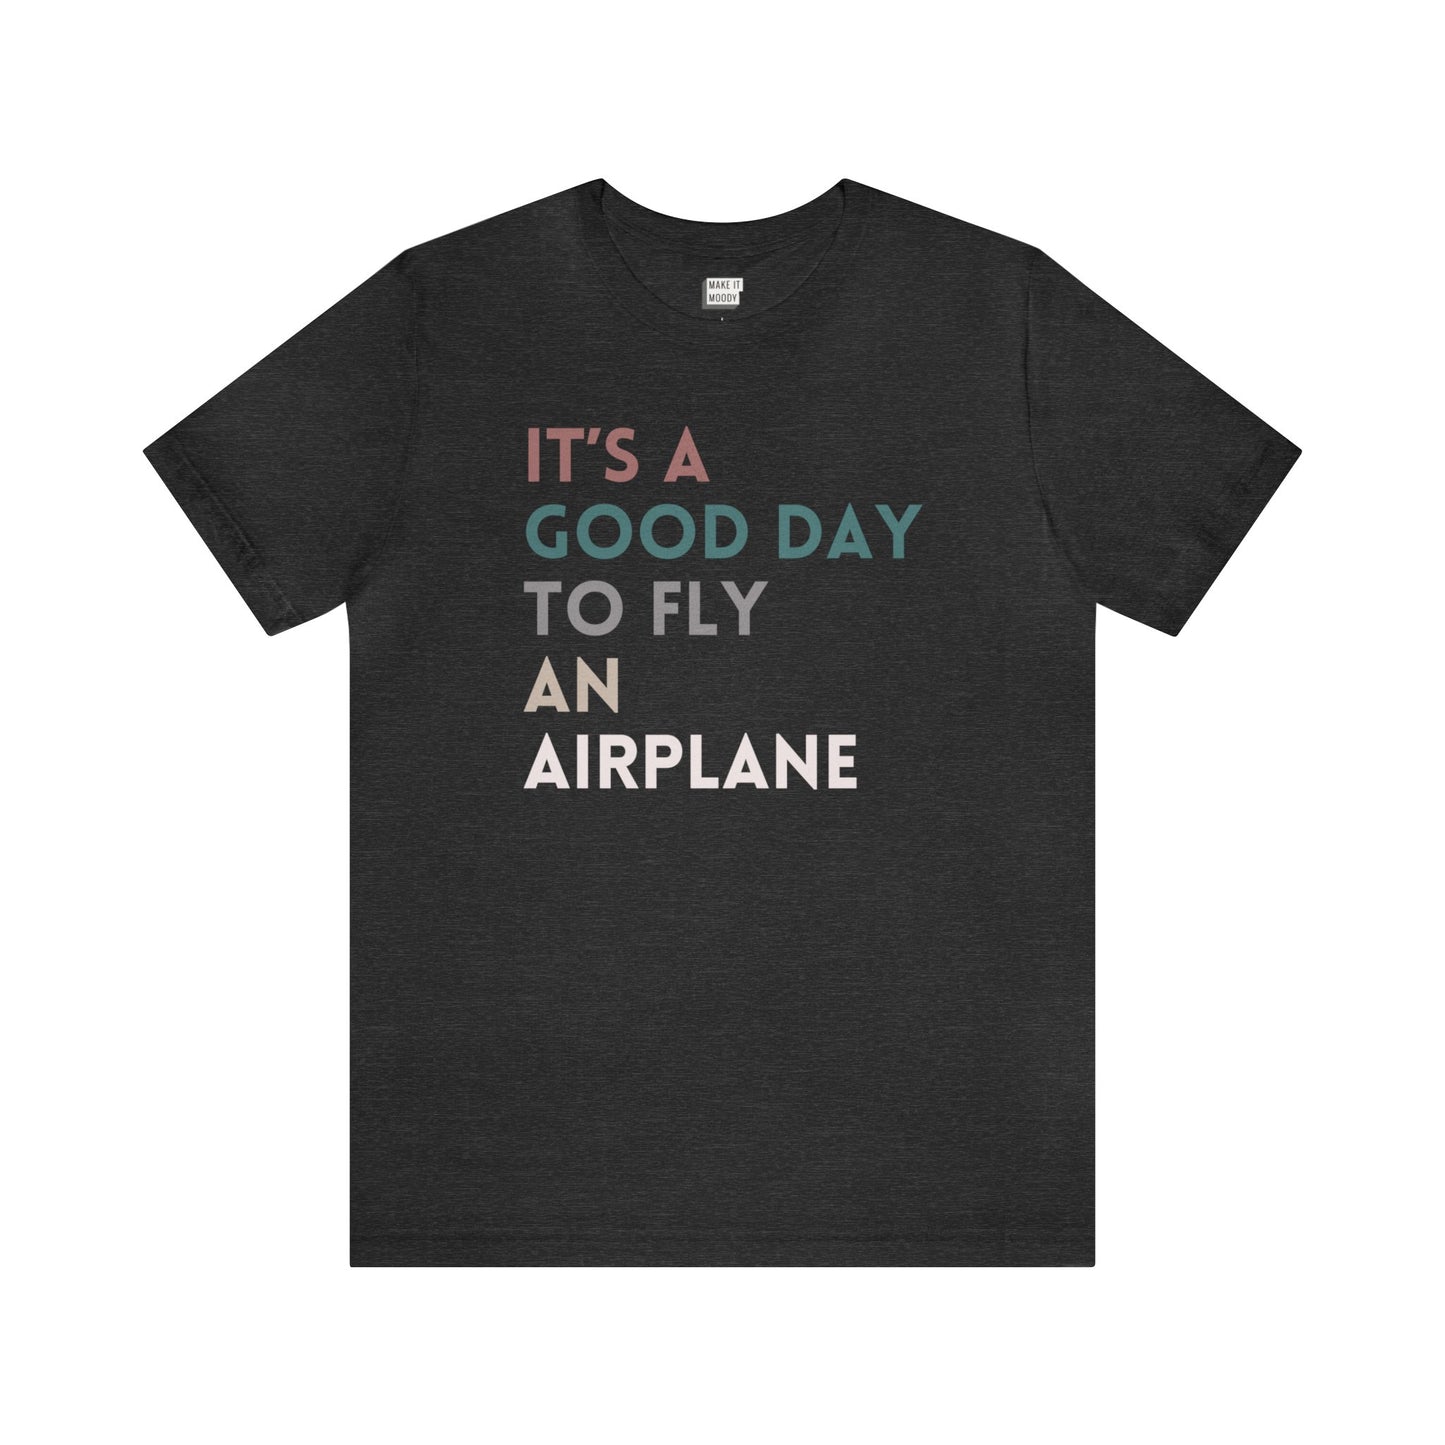 "It's a Good Day to Fly an Airplane" Aviation Tee